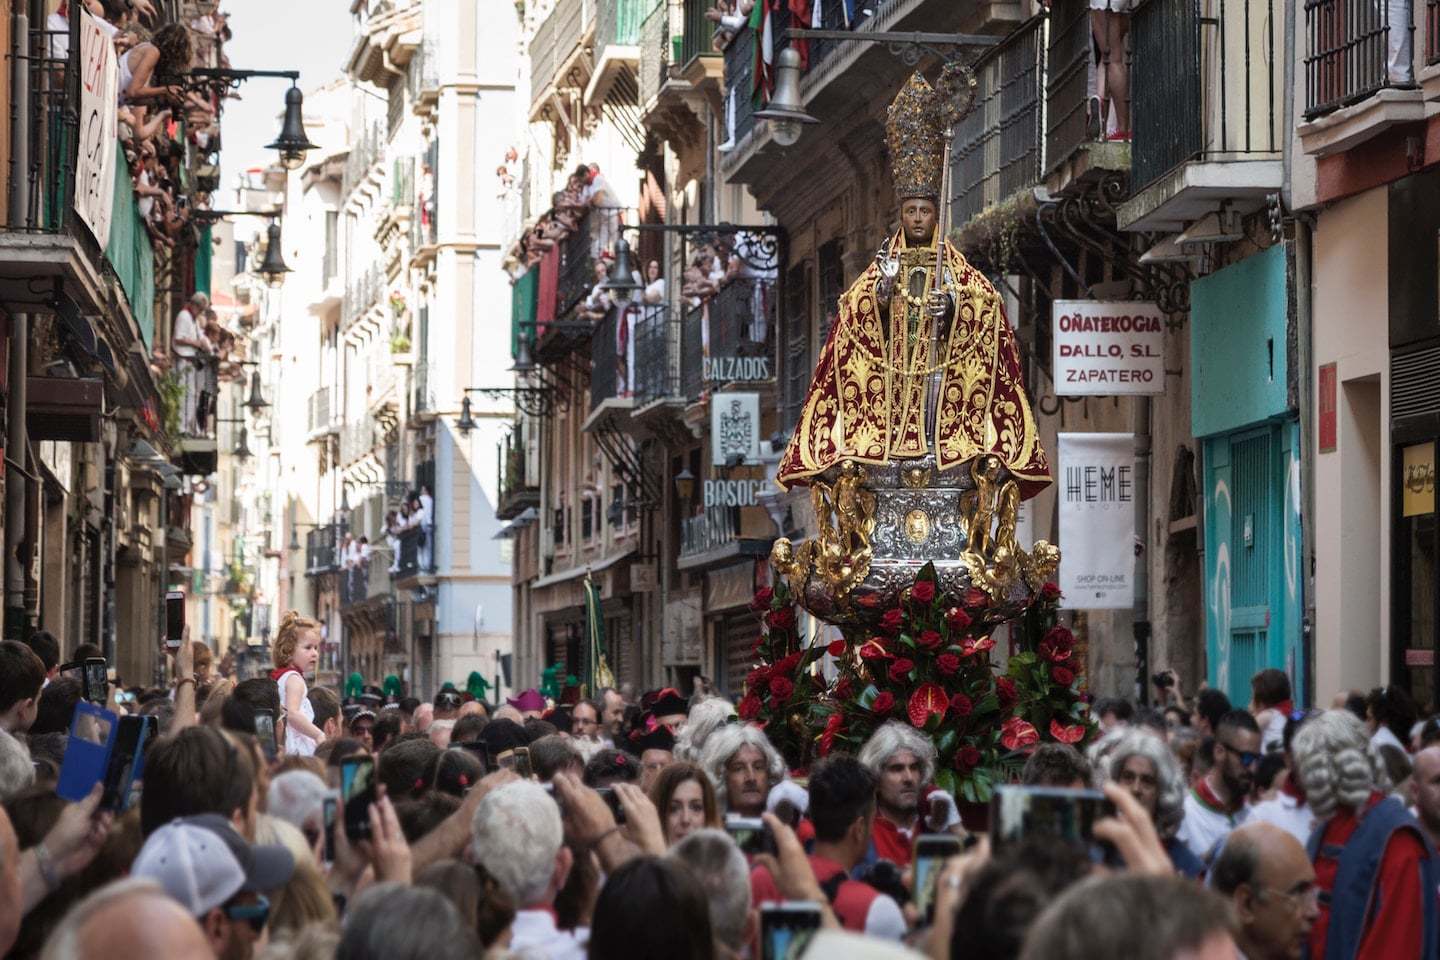 crowded street during festival in Spain